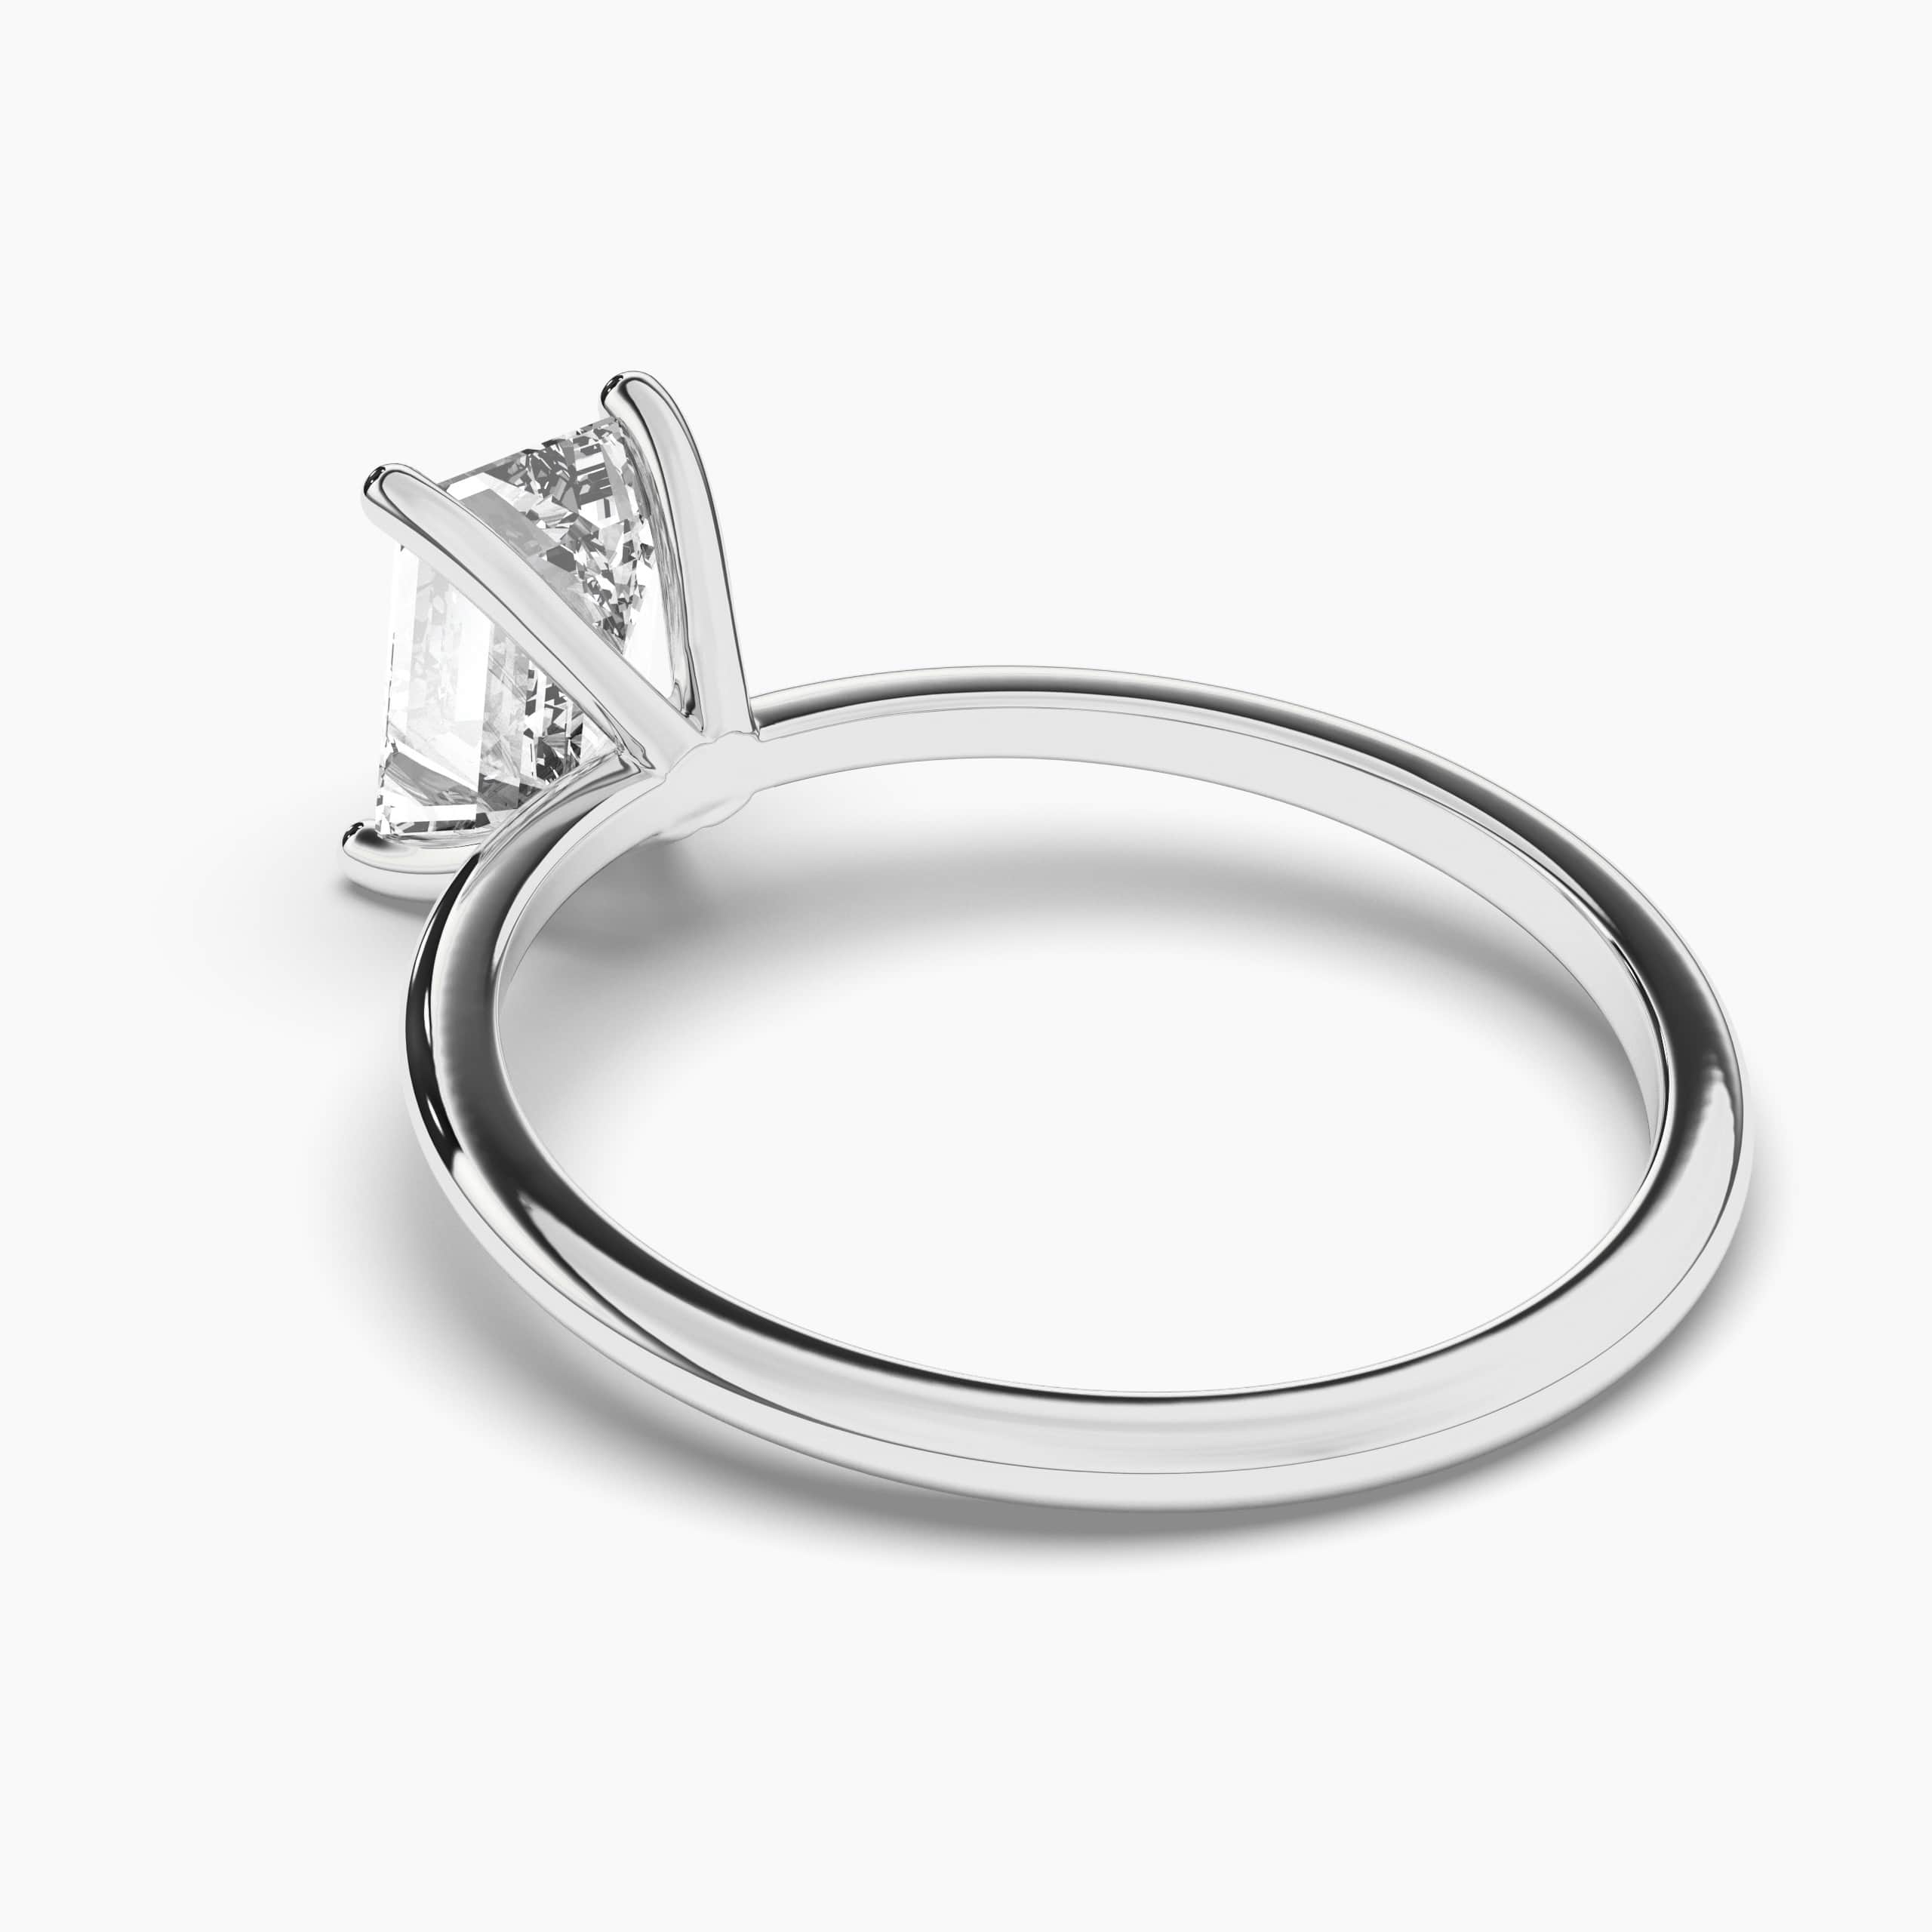 Emerald Cut Solitaire Engagement Ring in White Gold